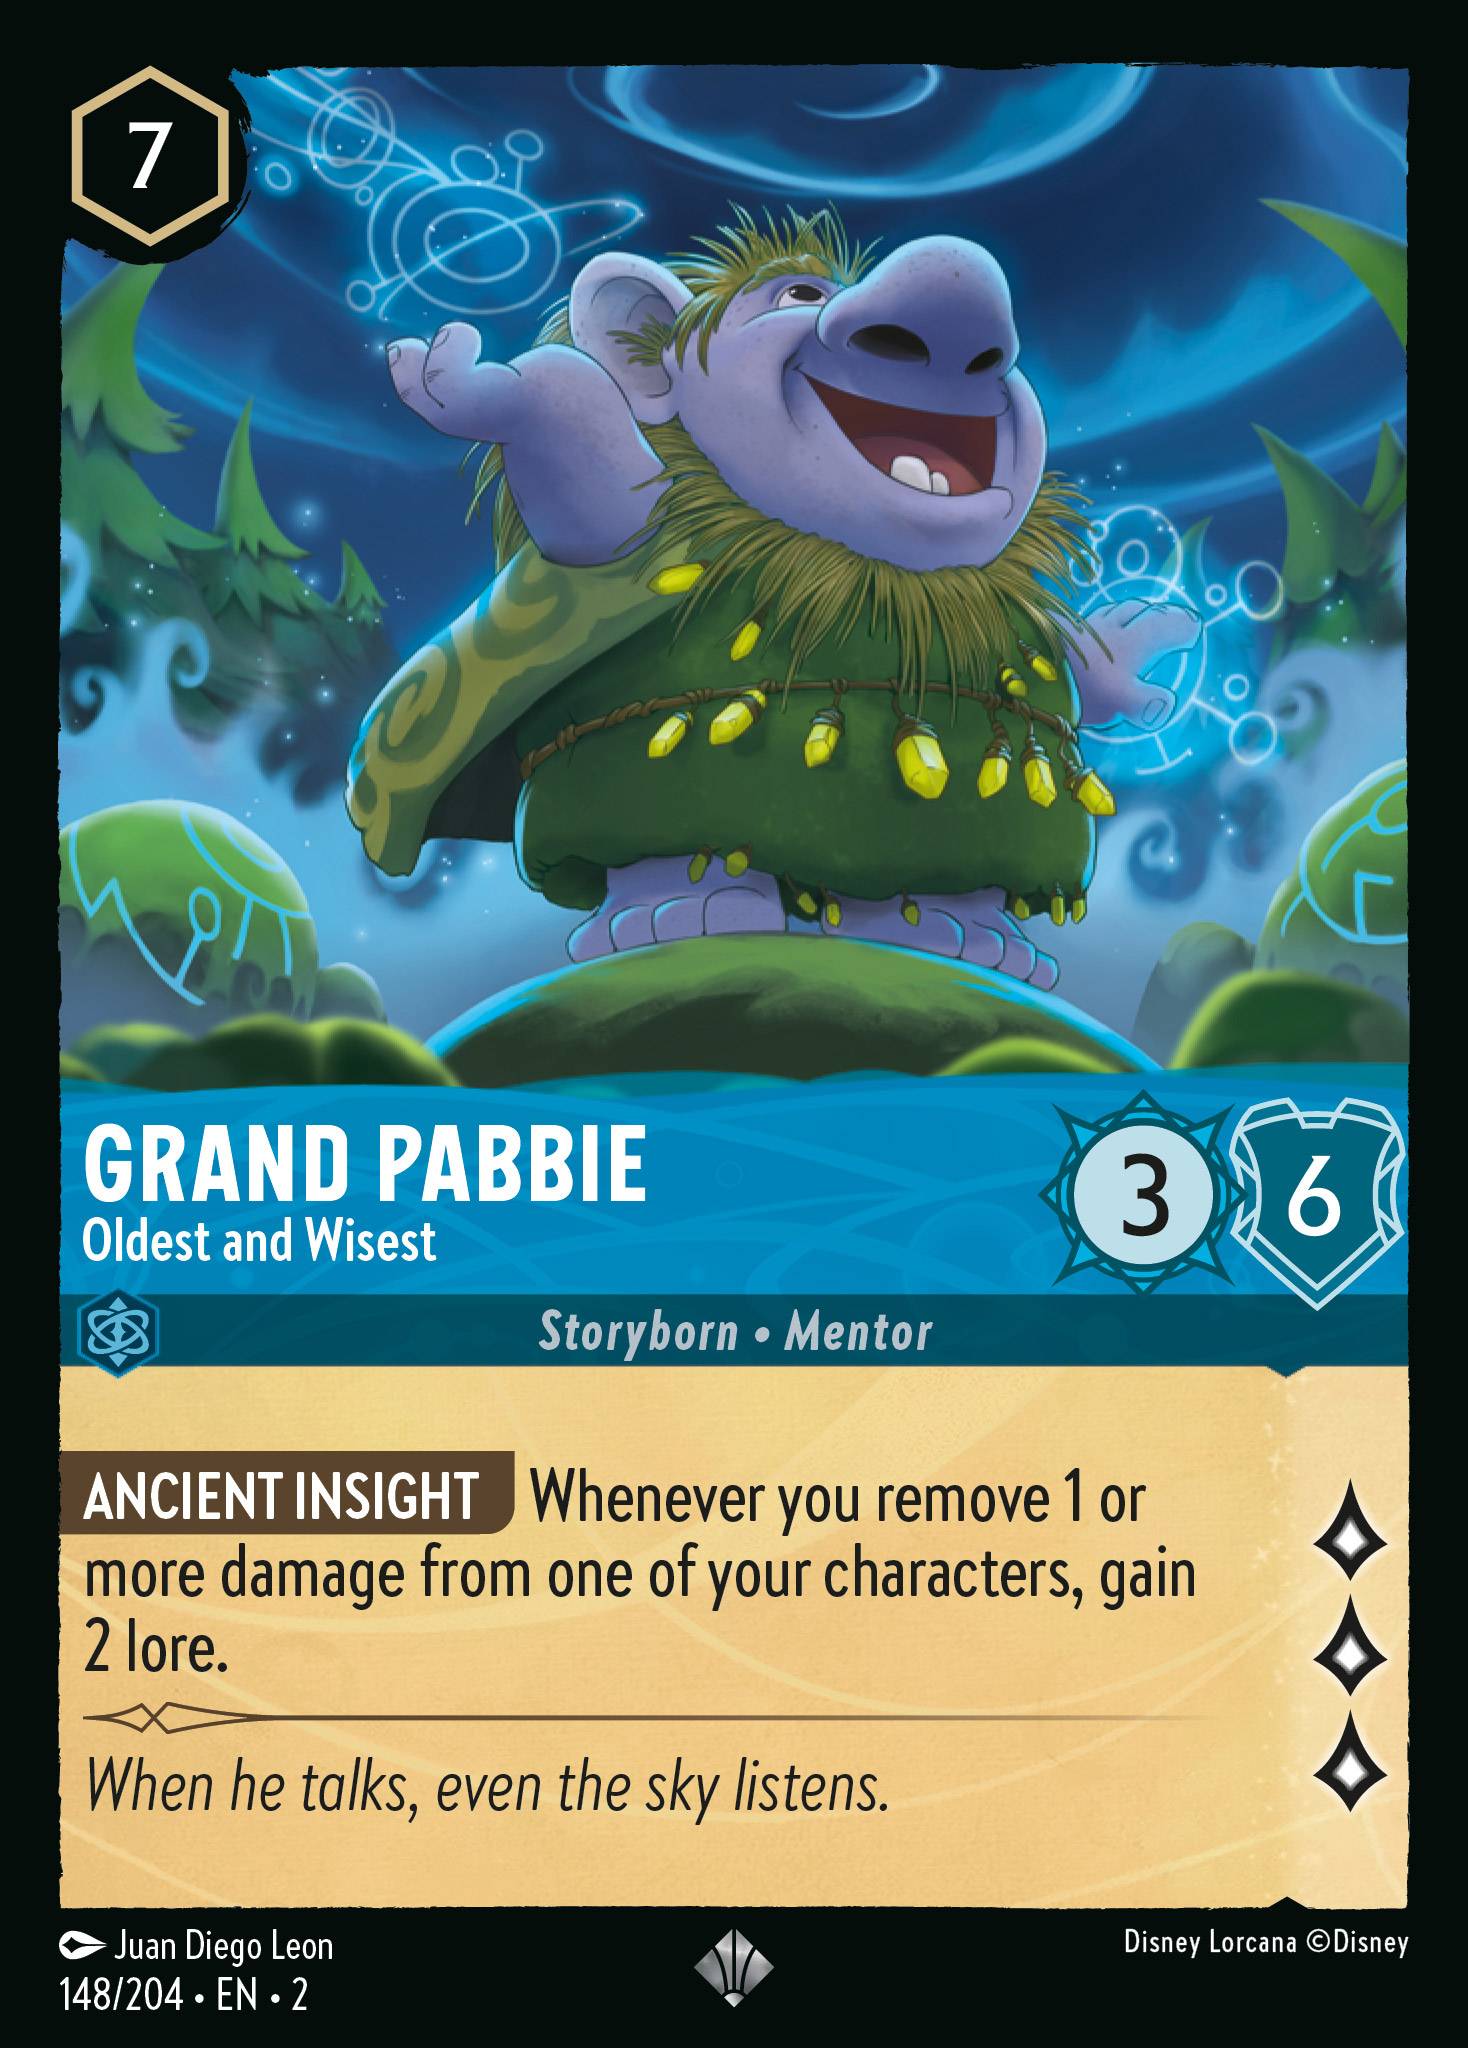 Grand Pabbie - Oldest and Wisest